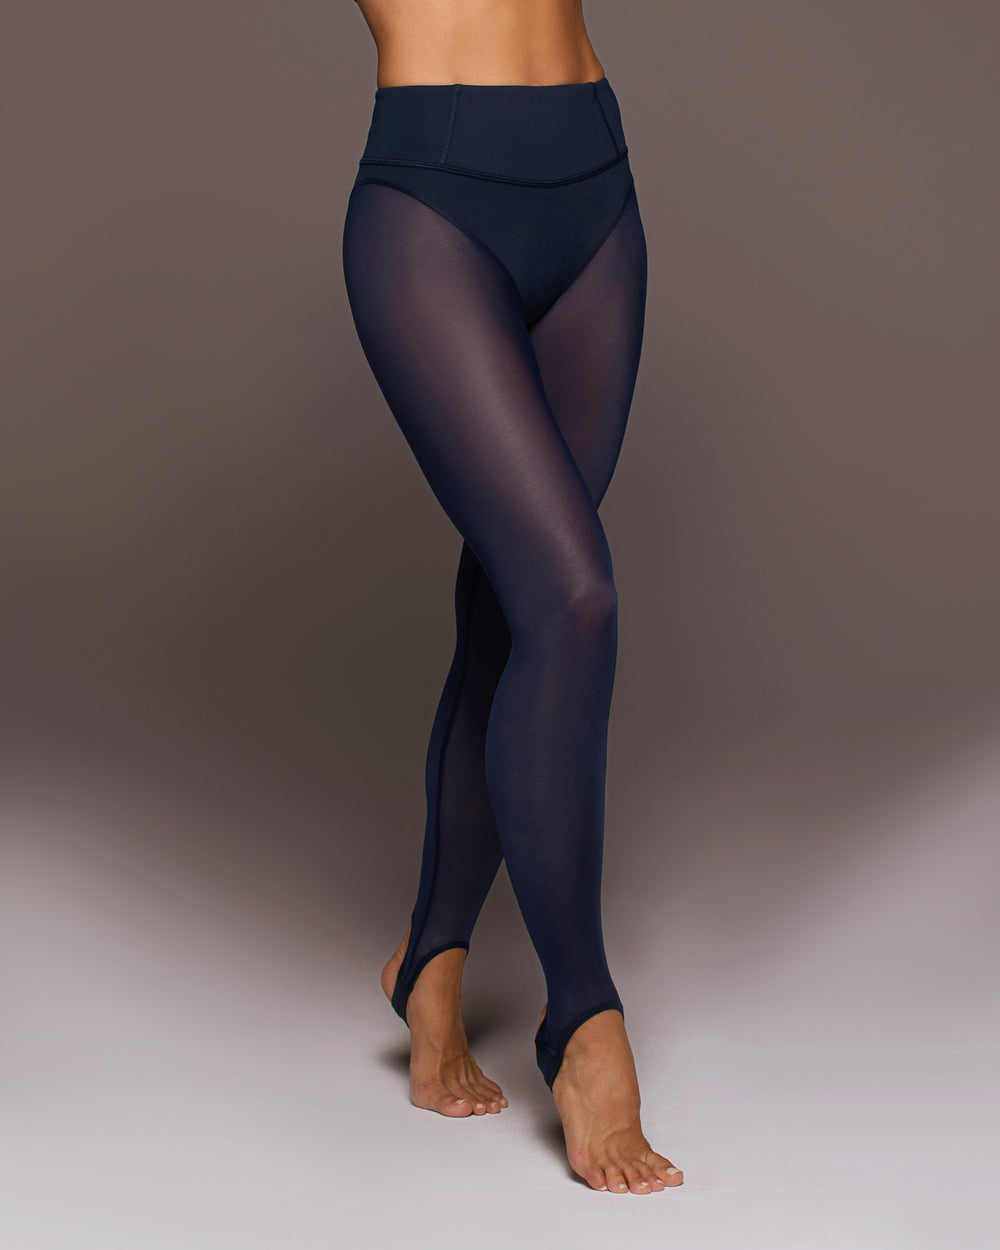 Buy latest wholesale leggings & tights in vibrant colors